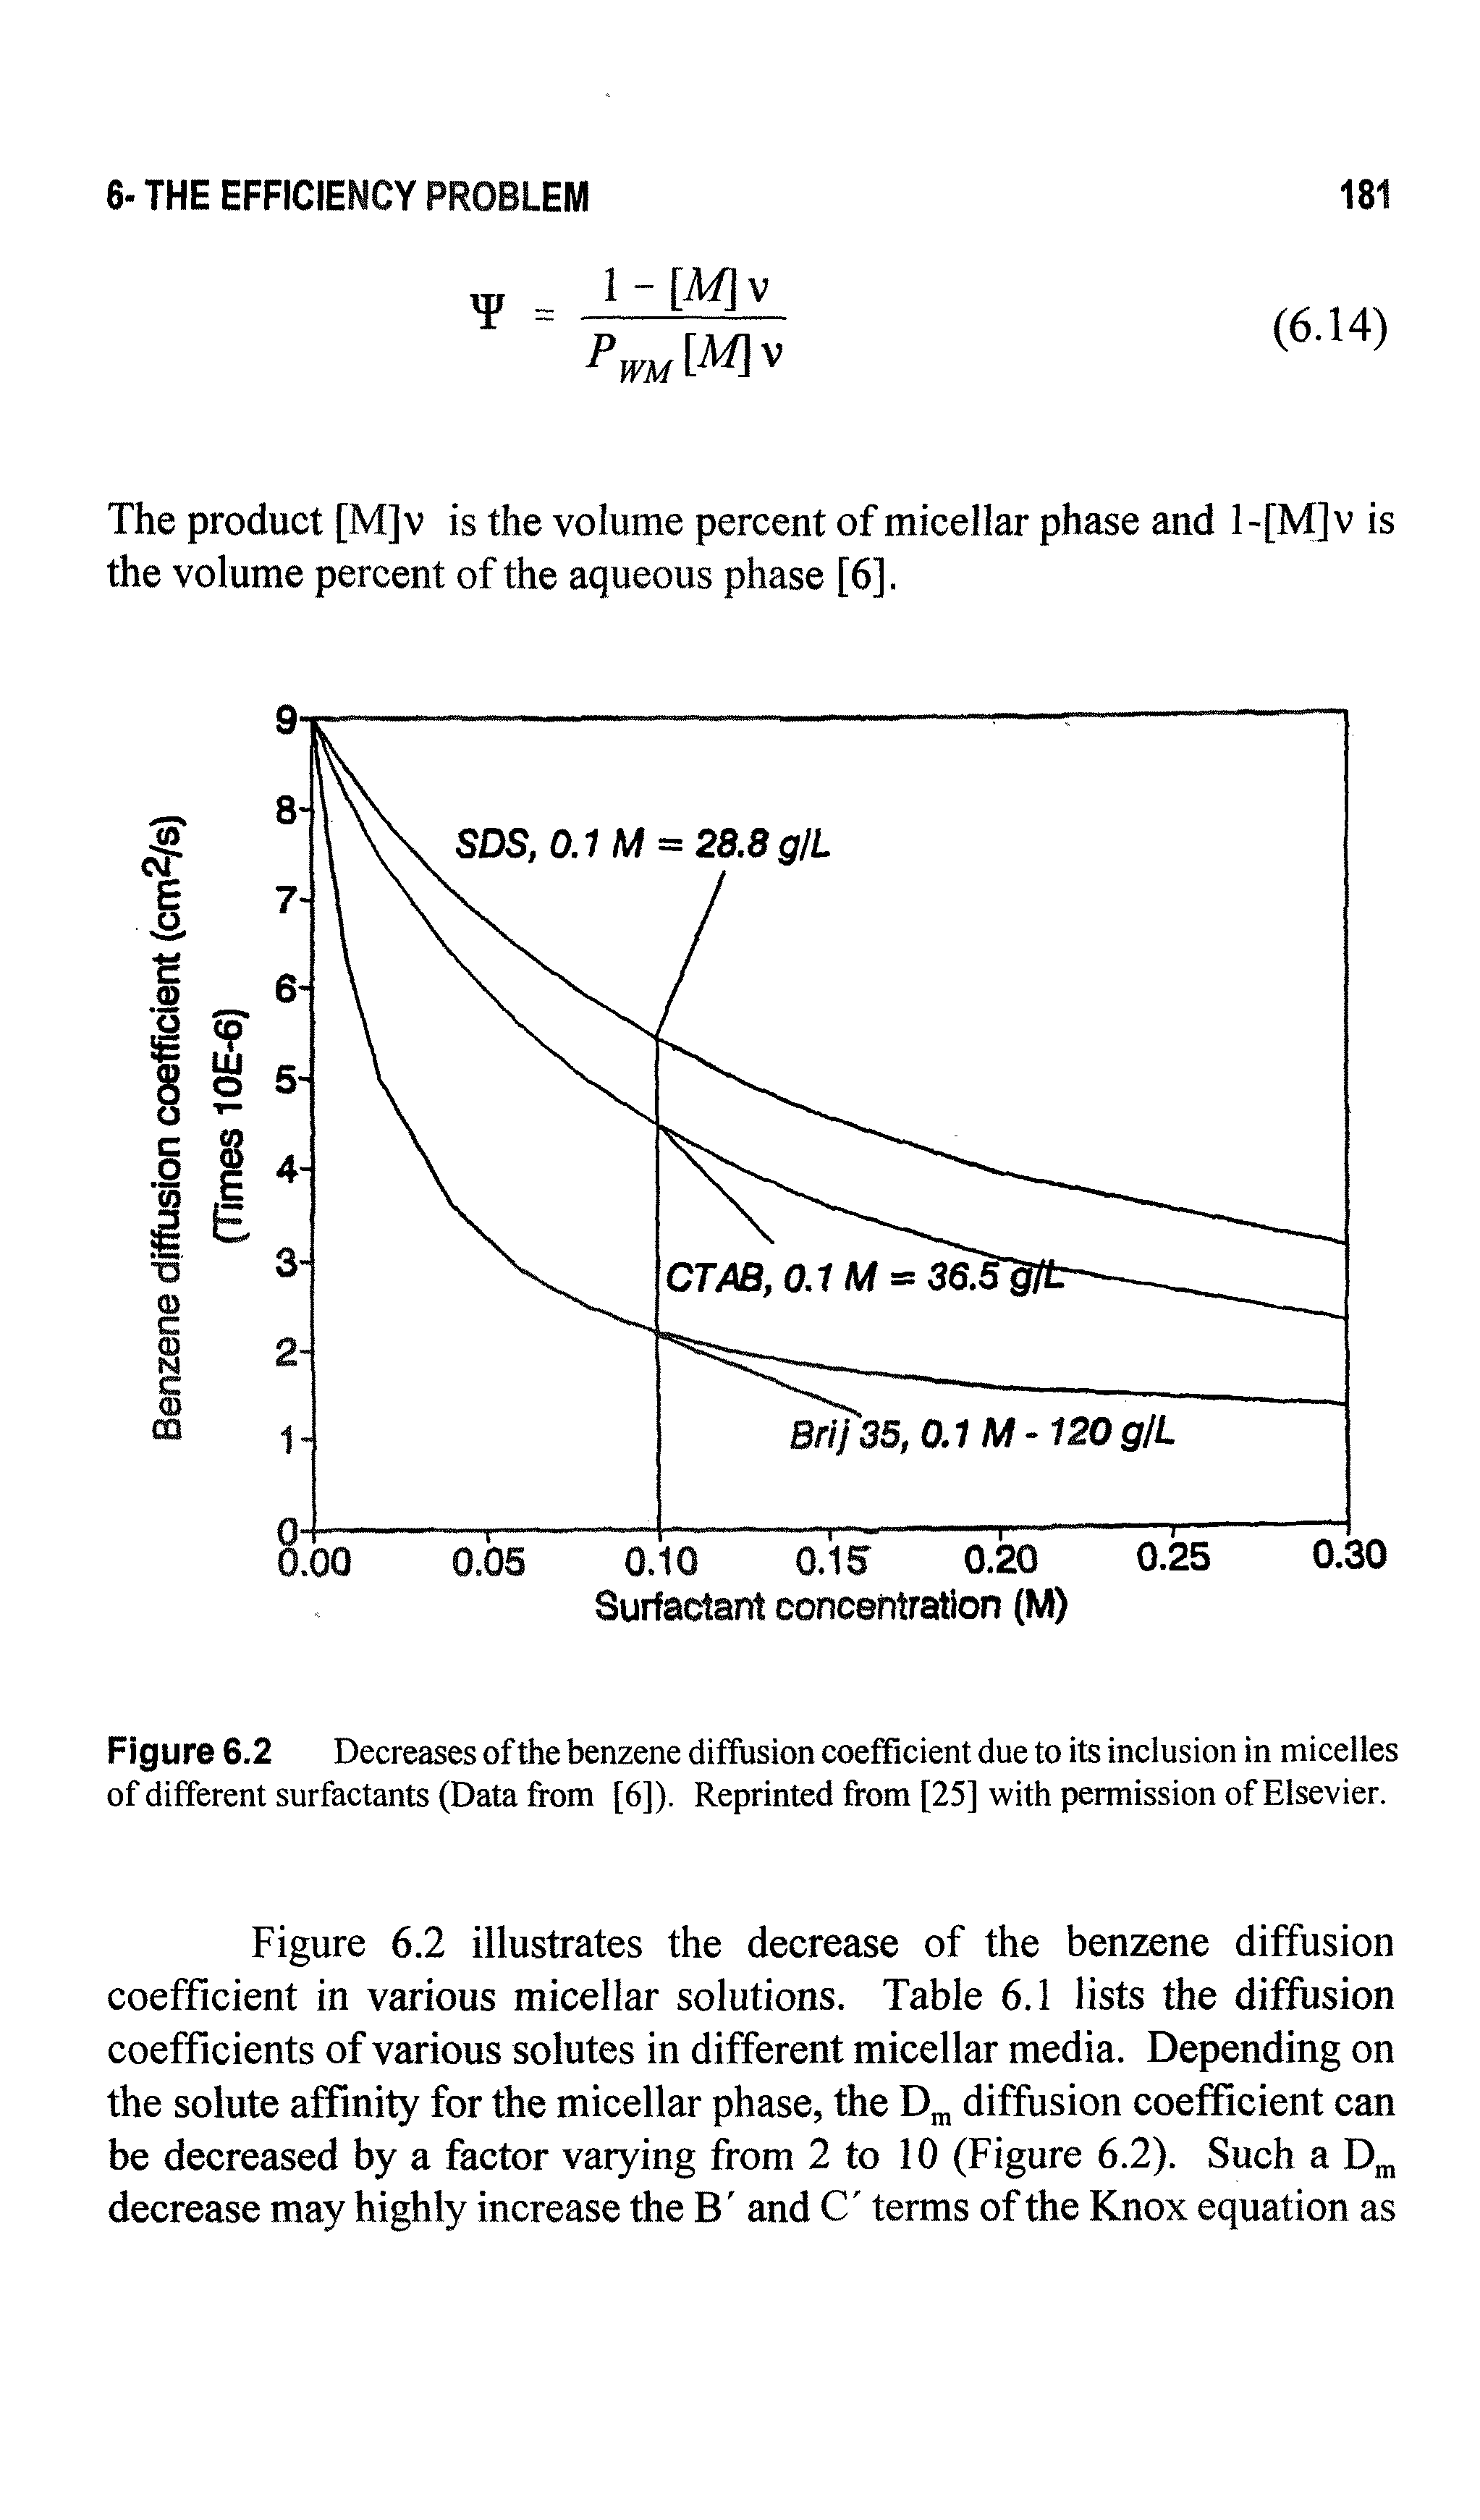 Figure 6.2 illustrates the decrease of the benzene diffusion coefficient in various micellar solutions. Table 6.1 lists the diffusion coefficients of various solutes in different micellar media. Depending on the solute affinity for the micellar phase, the D , diffusion coefficient can be decreased by a factor varying from 2 to 10 (Figure 6.2). Such a decrease may highly increase the B and C terms of the Knox equation as...